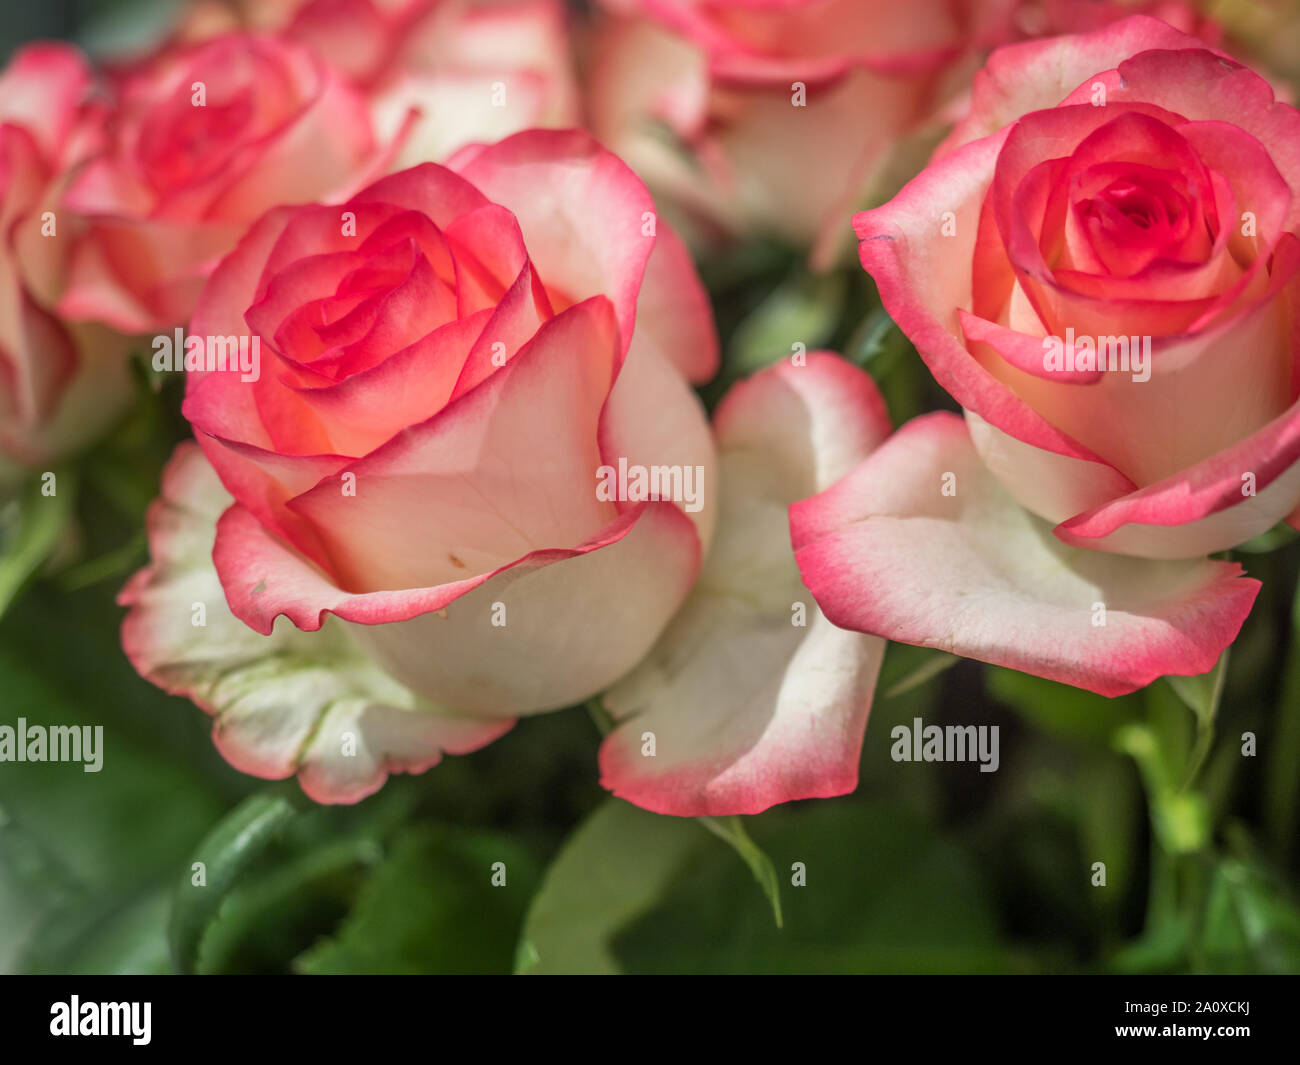 Page 2 - Royal Rose High Resolution Stock Photography and Images - Alamy